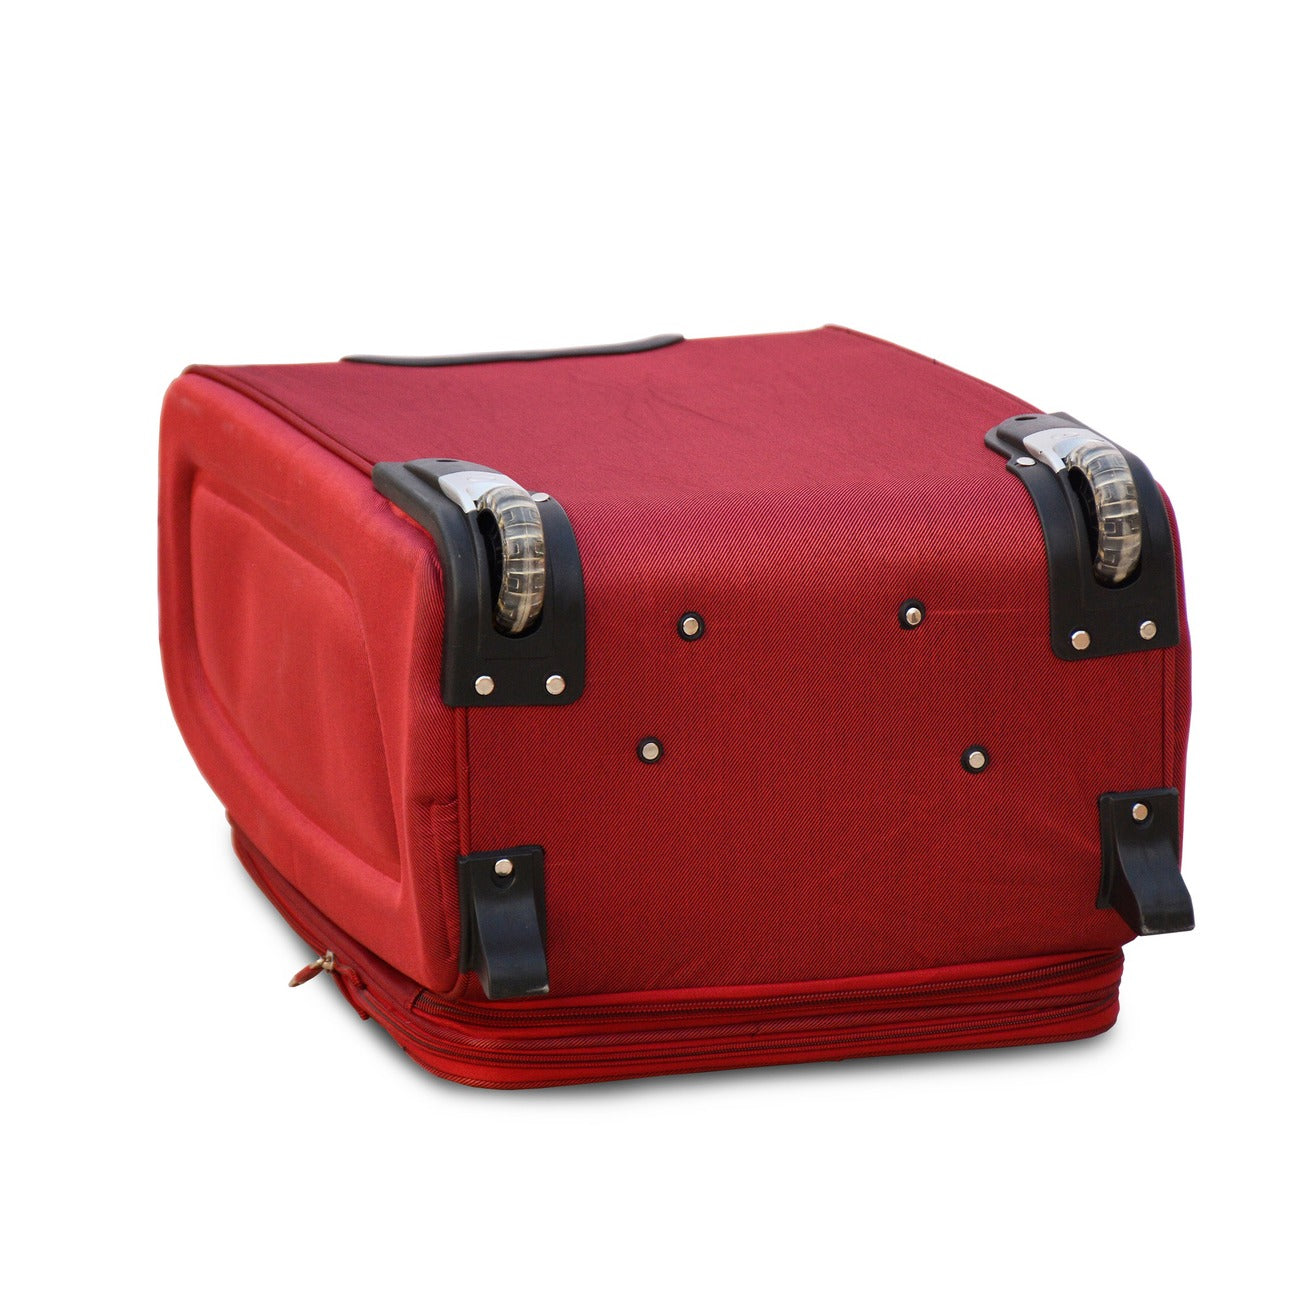 20" Red Colour SJ JIAN 2 Wheel Luggage Lightweight Soft Material Carry On Trolley Bag